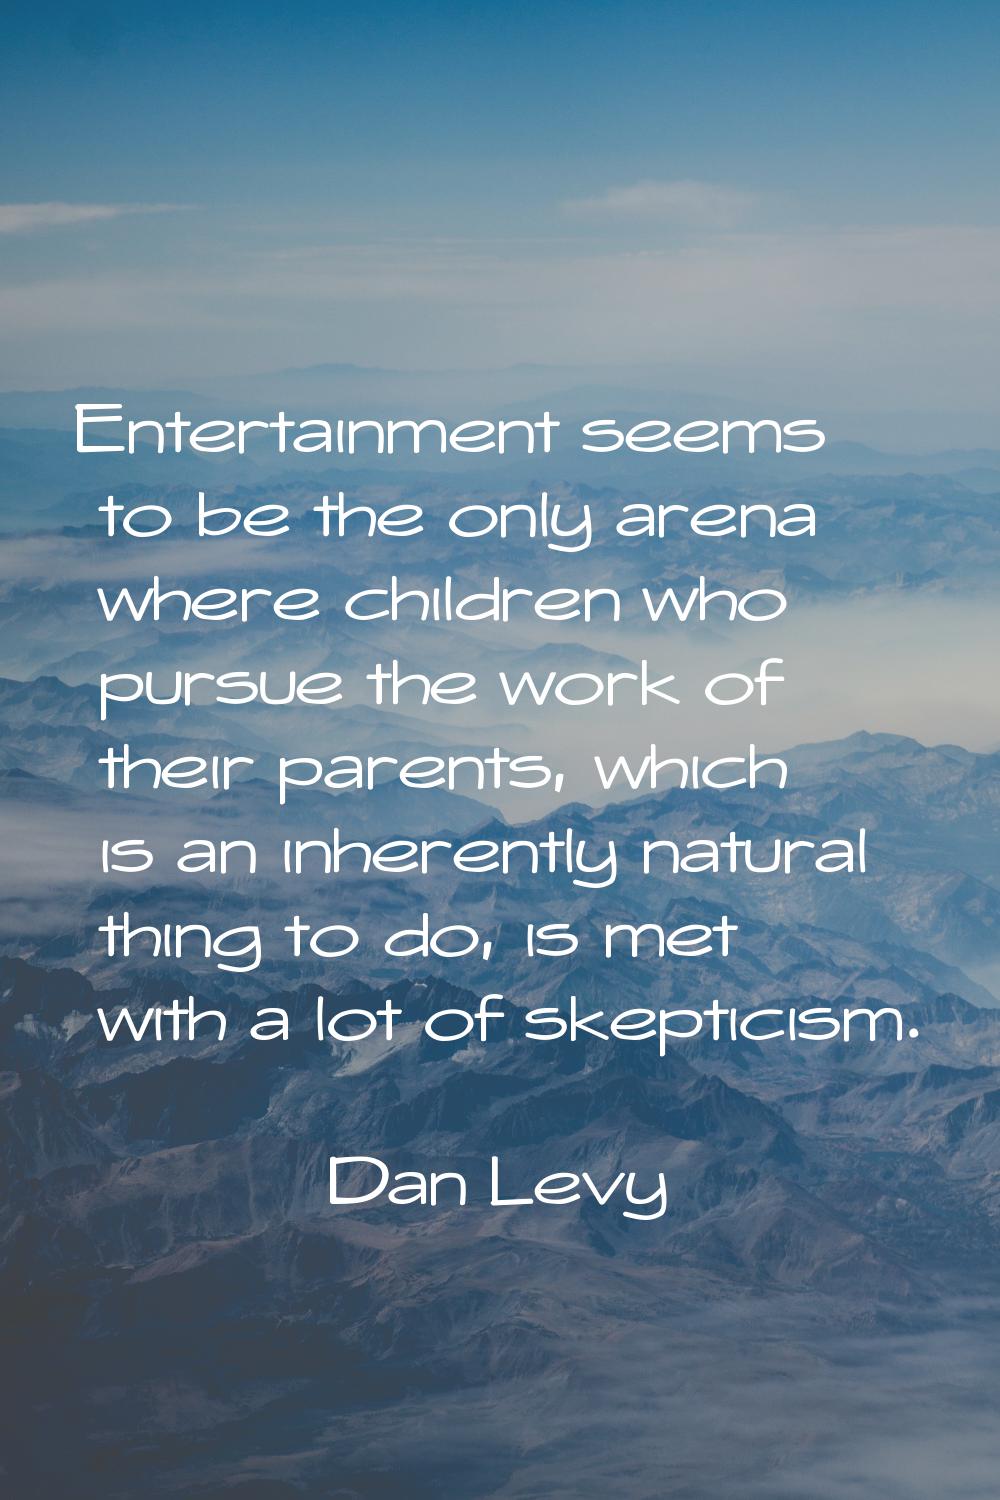 Entertainment seems to be the only arena where children who pursue the work of their parents, which